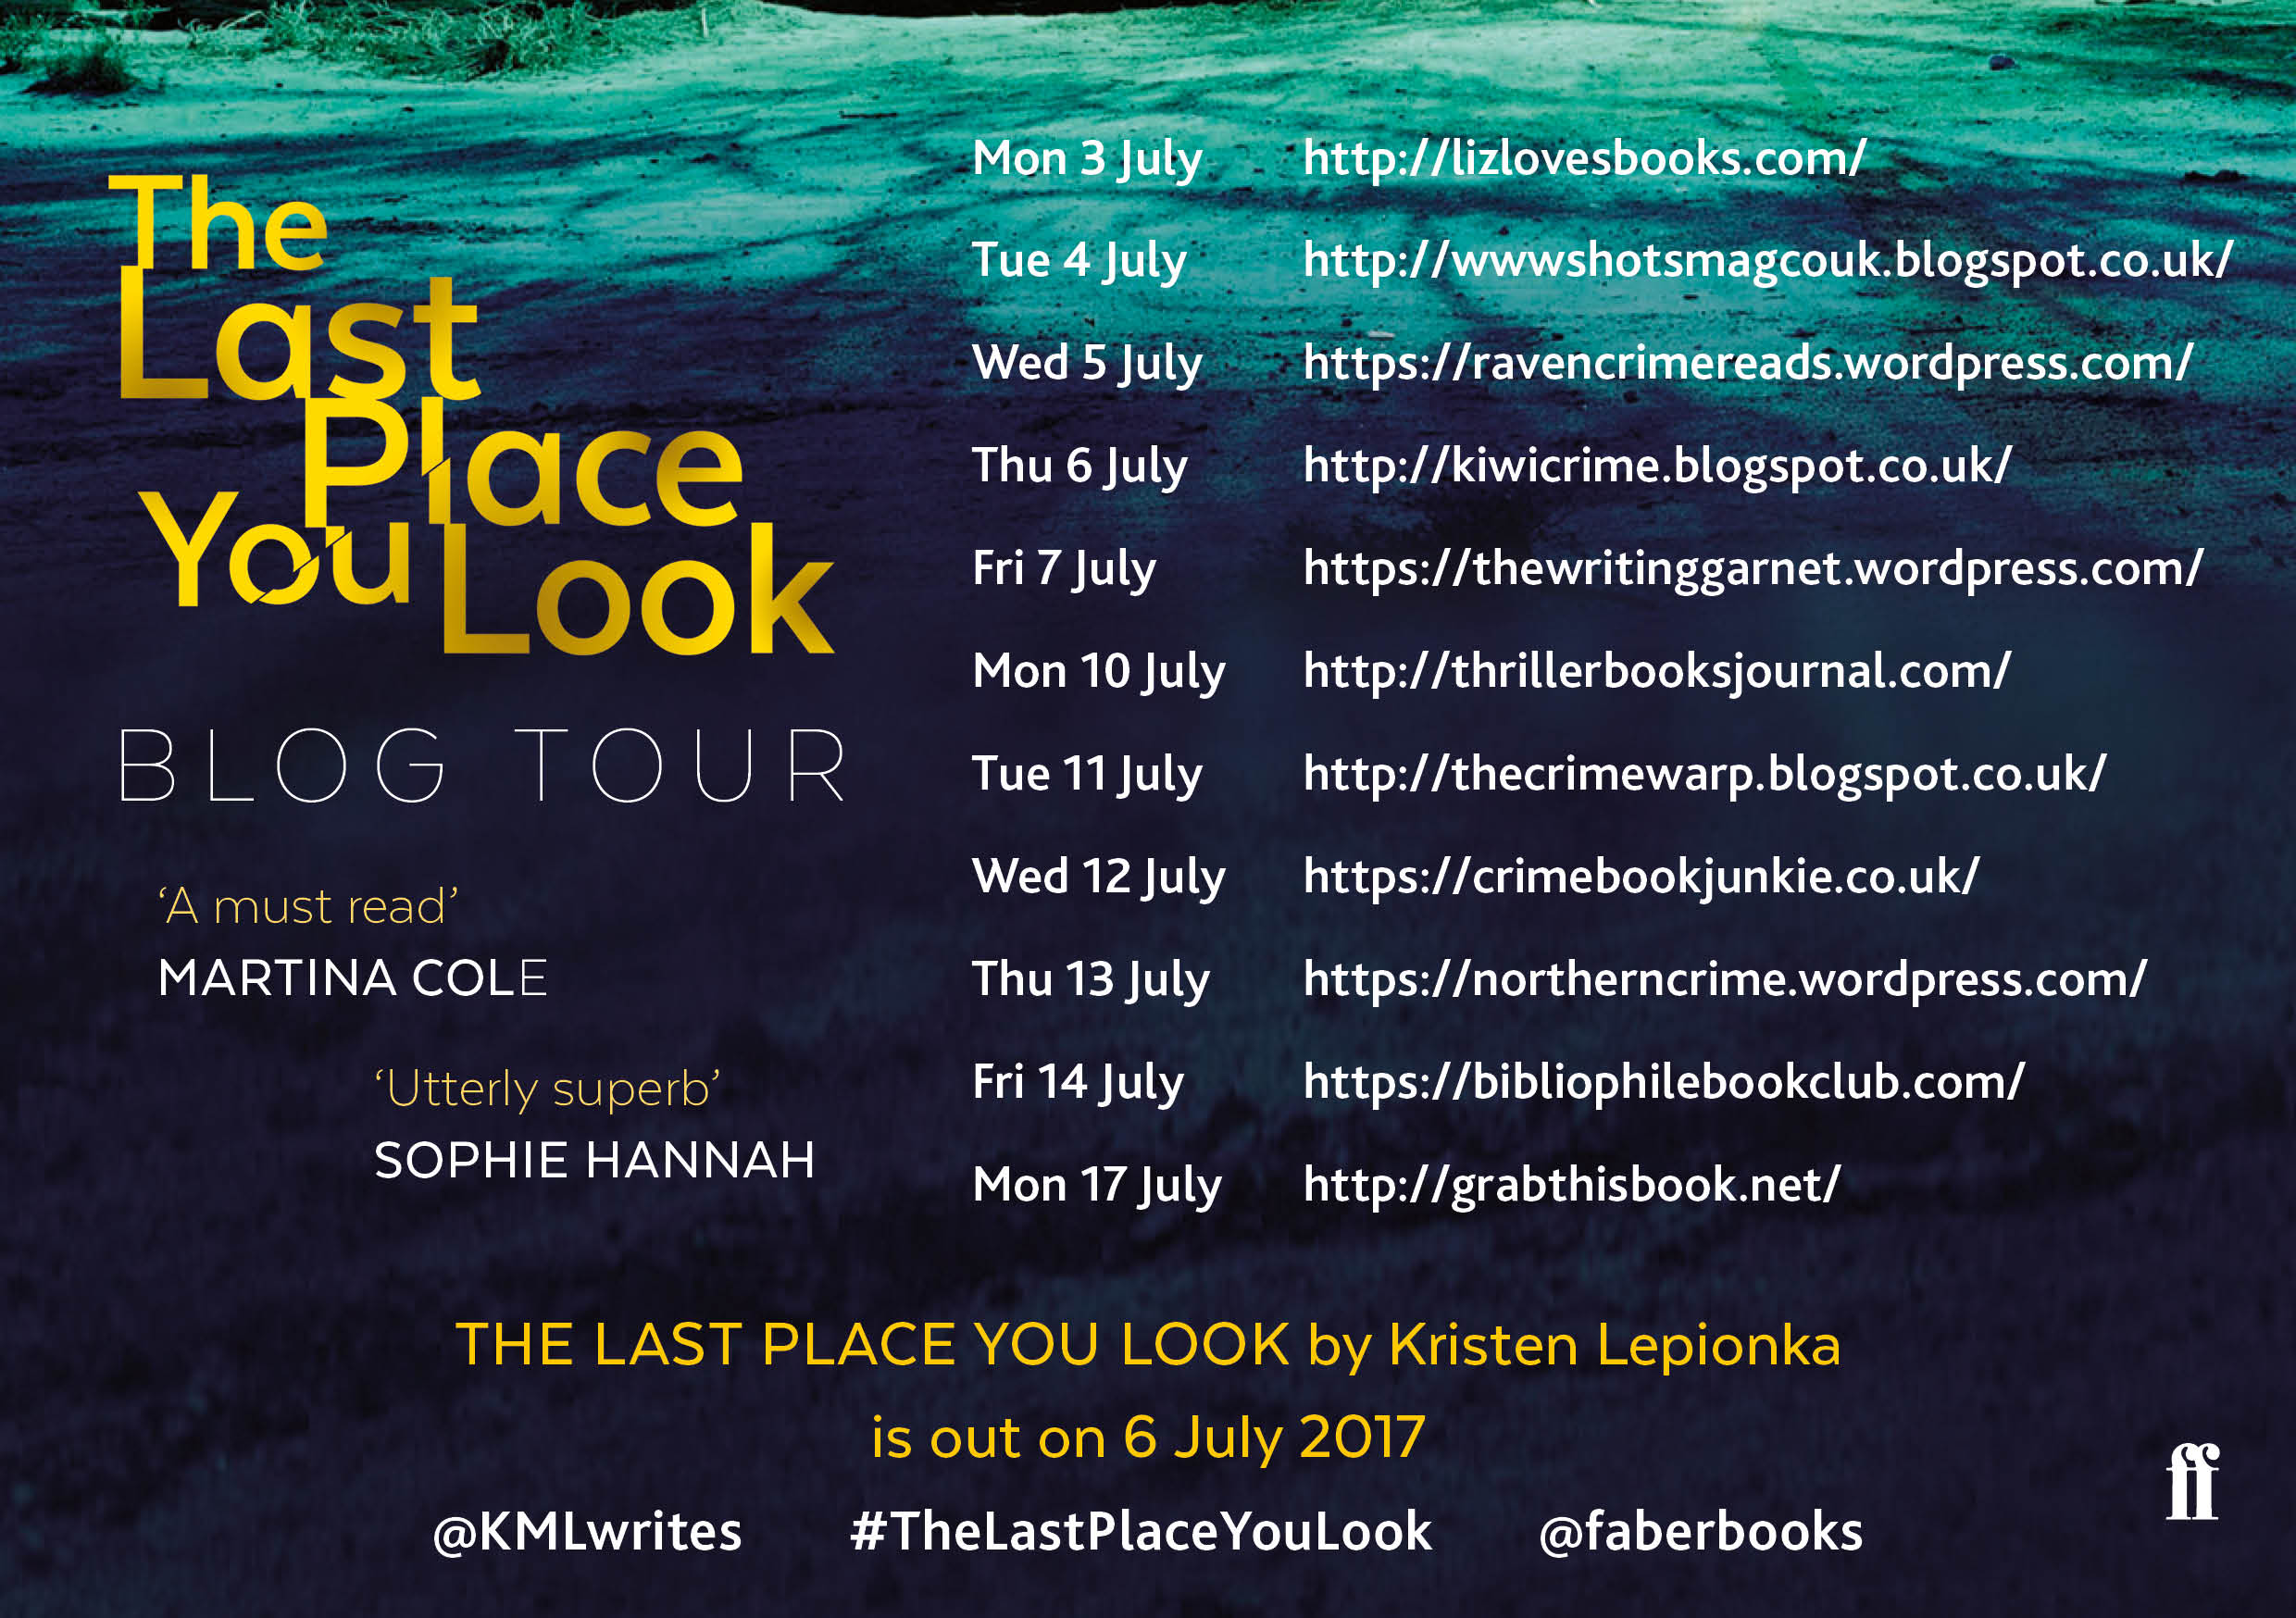 The Last Place You Look - BLOG TOUR POSTER